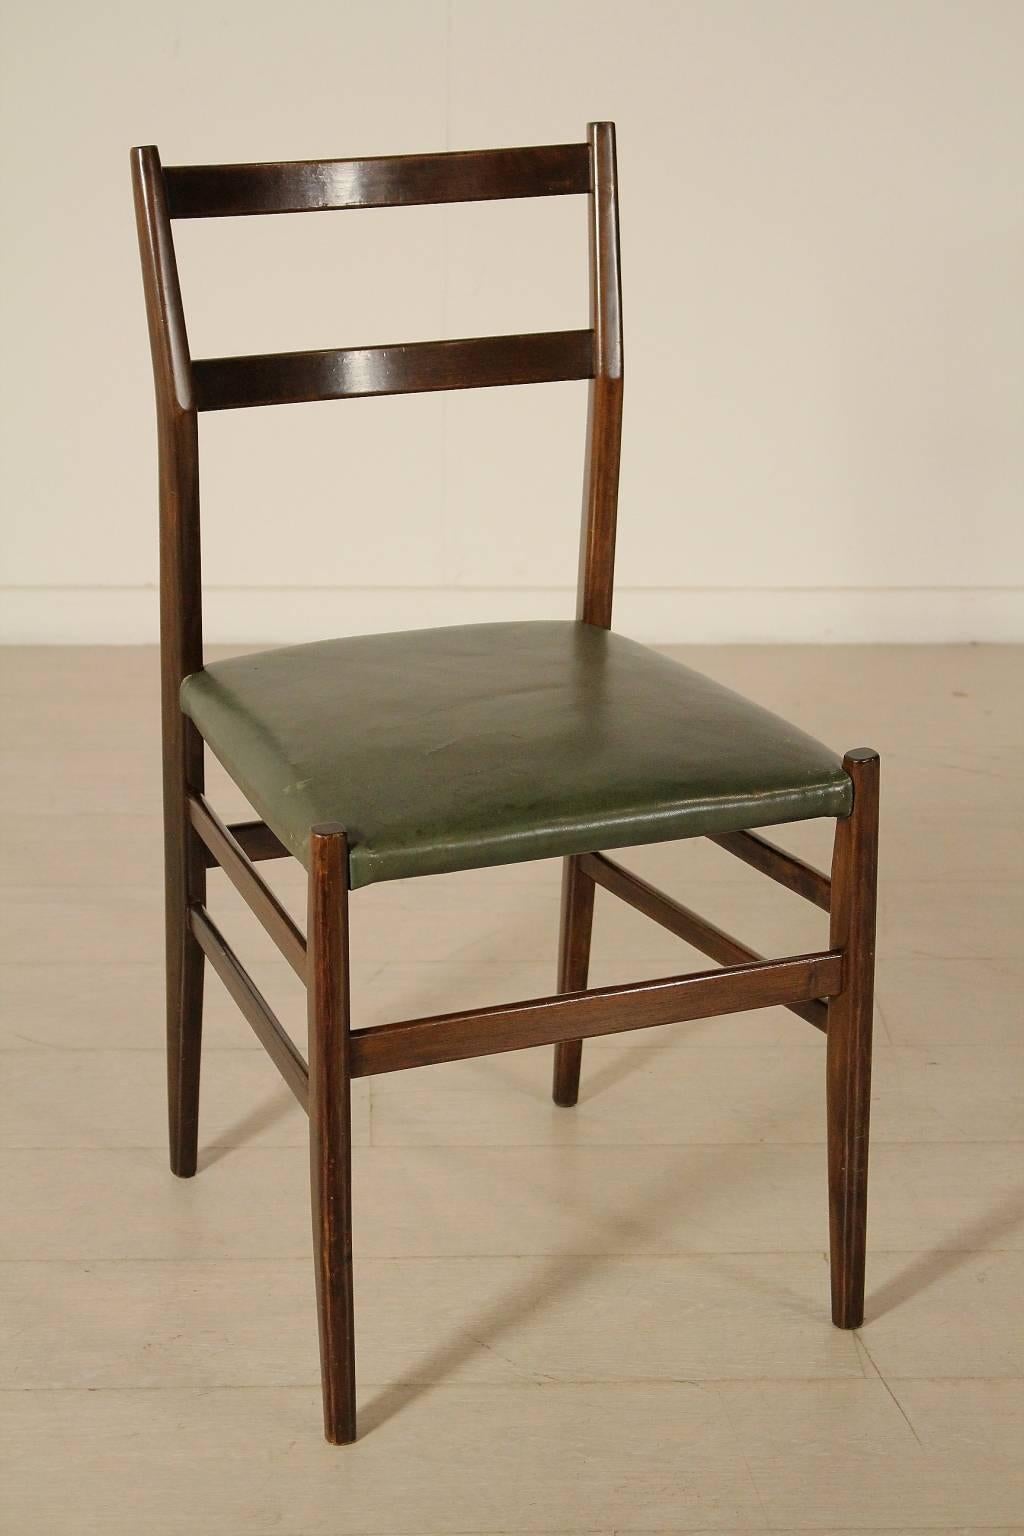 A group of four chairs designed by Gio Ponti, stained ash wood, leatherette seat. Manufactured in Italy, 1950s.